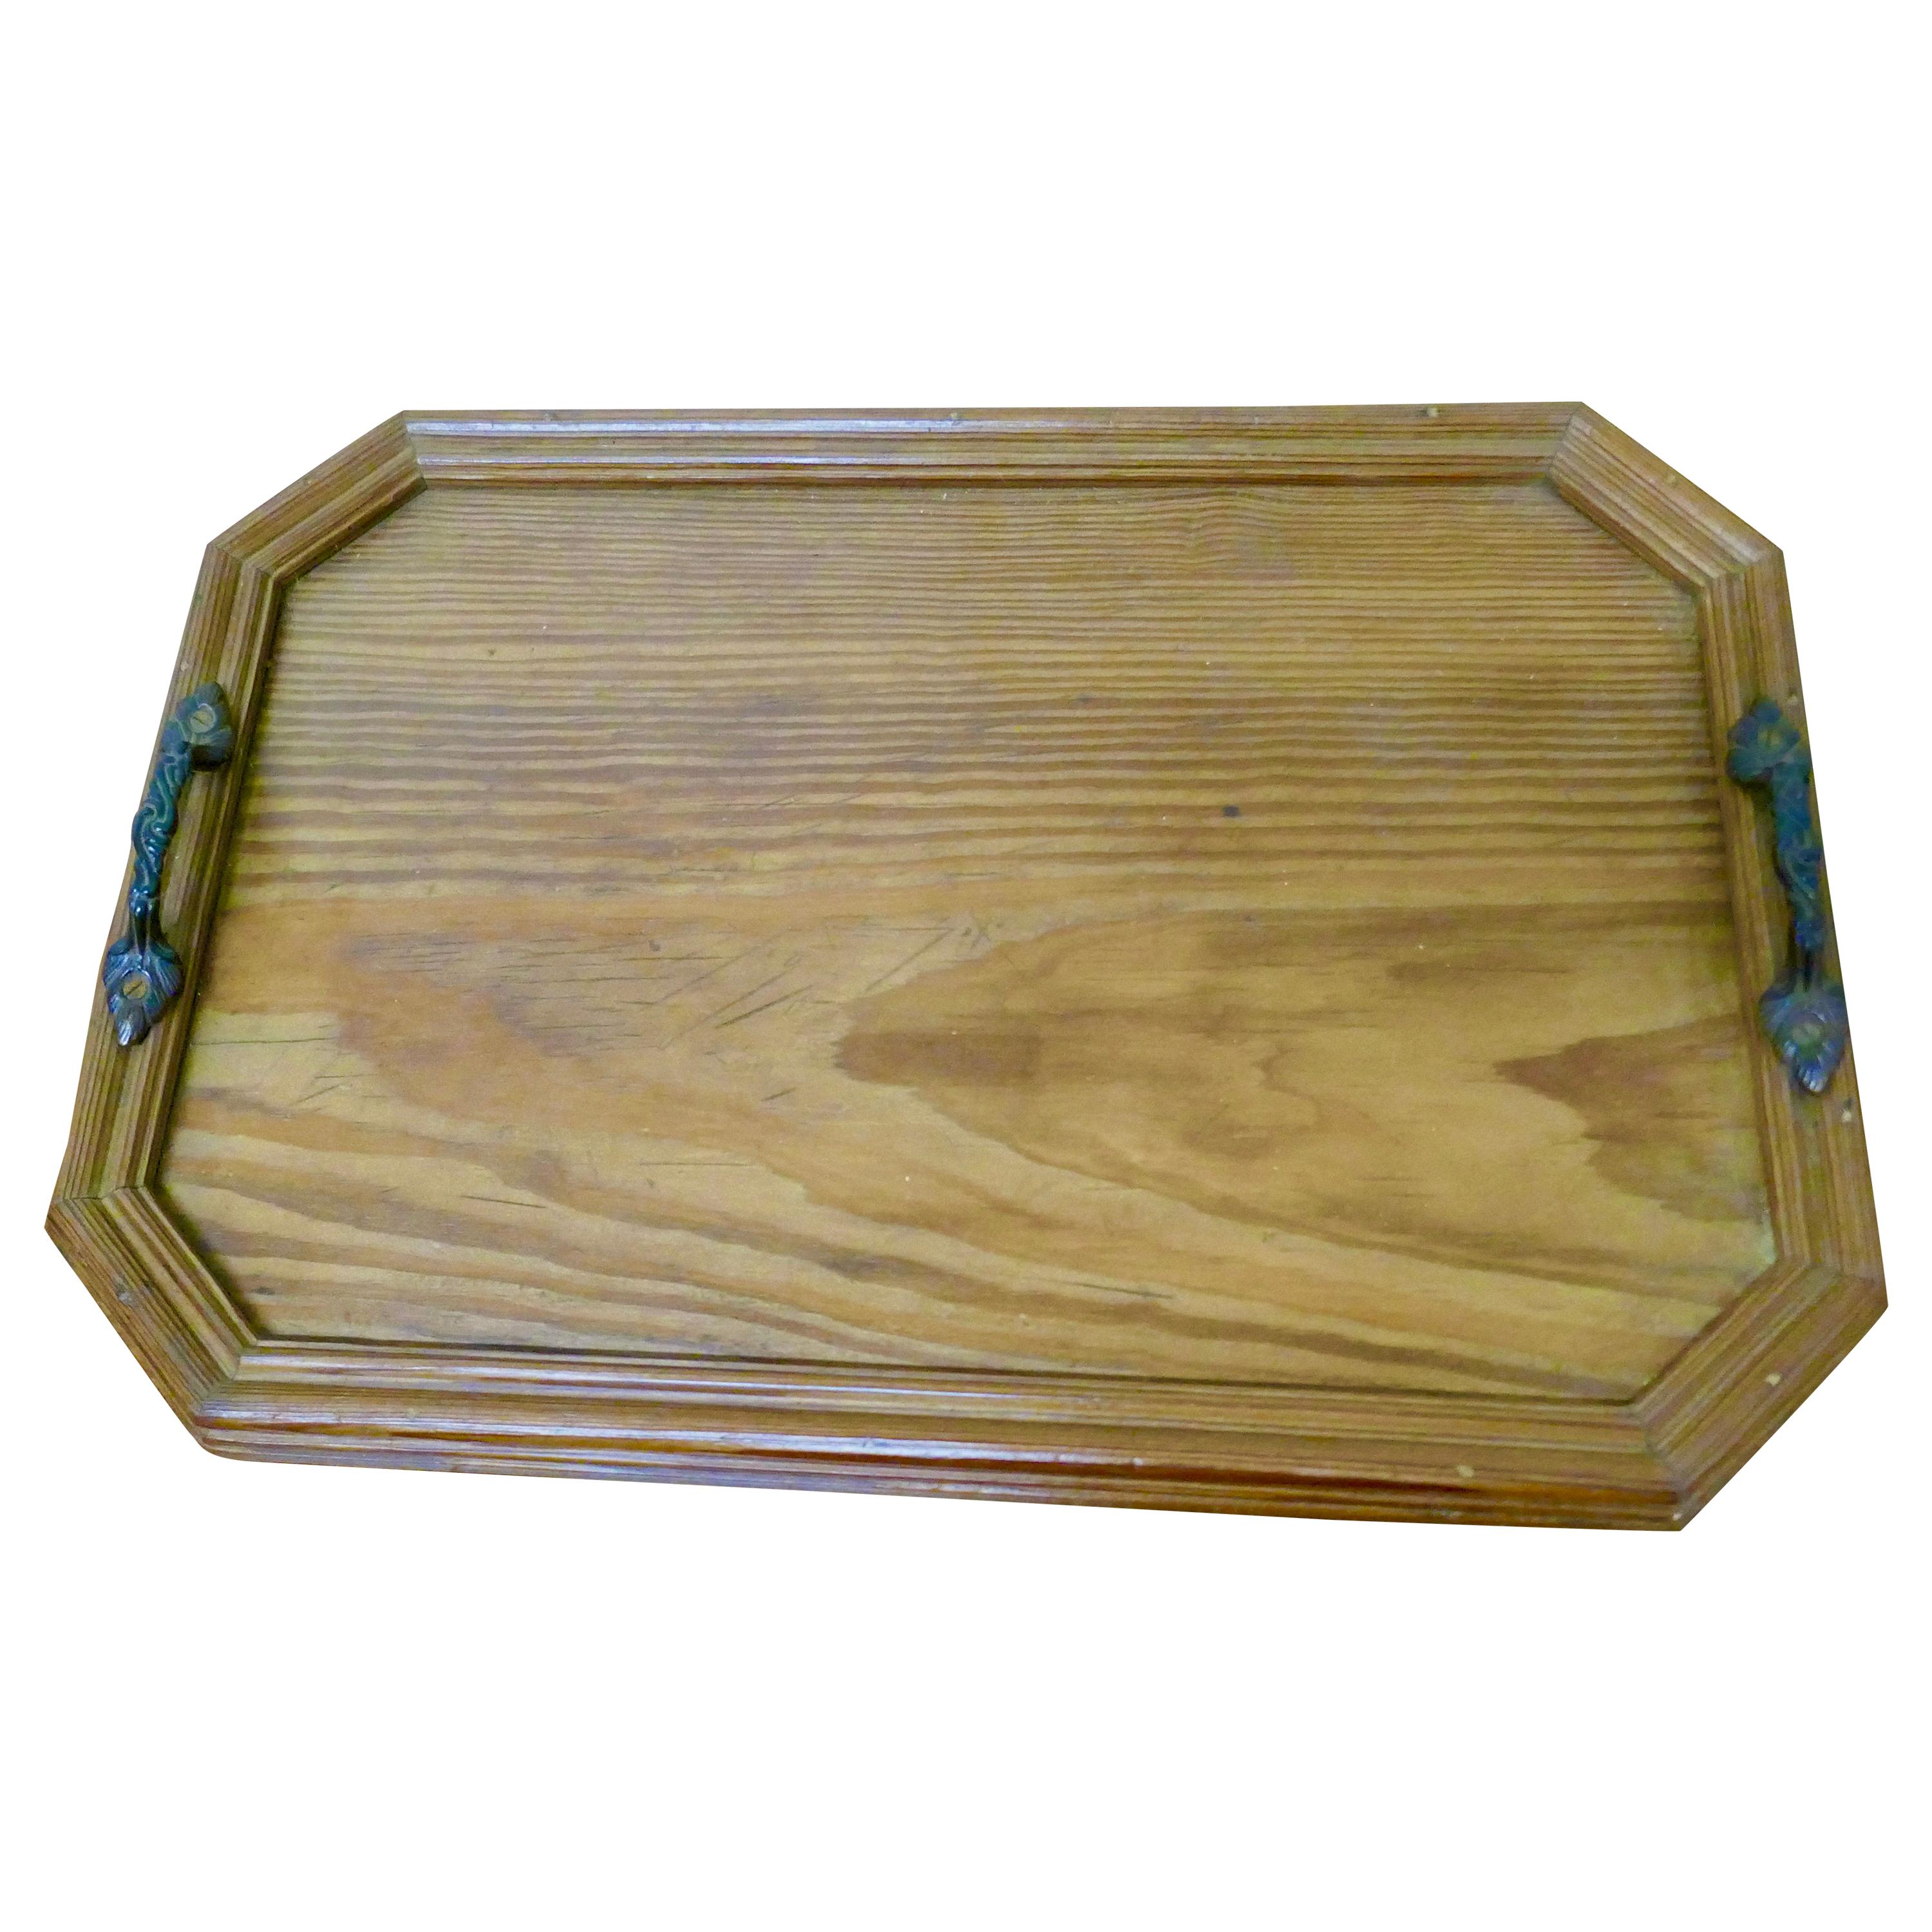 Pitch Pine Country Tray